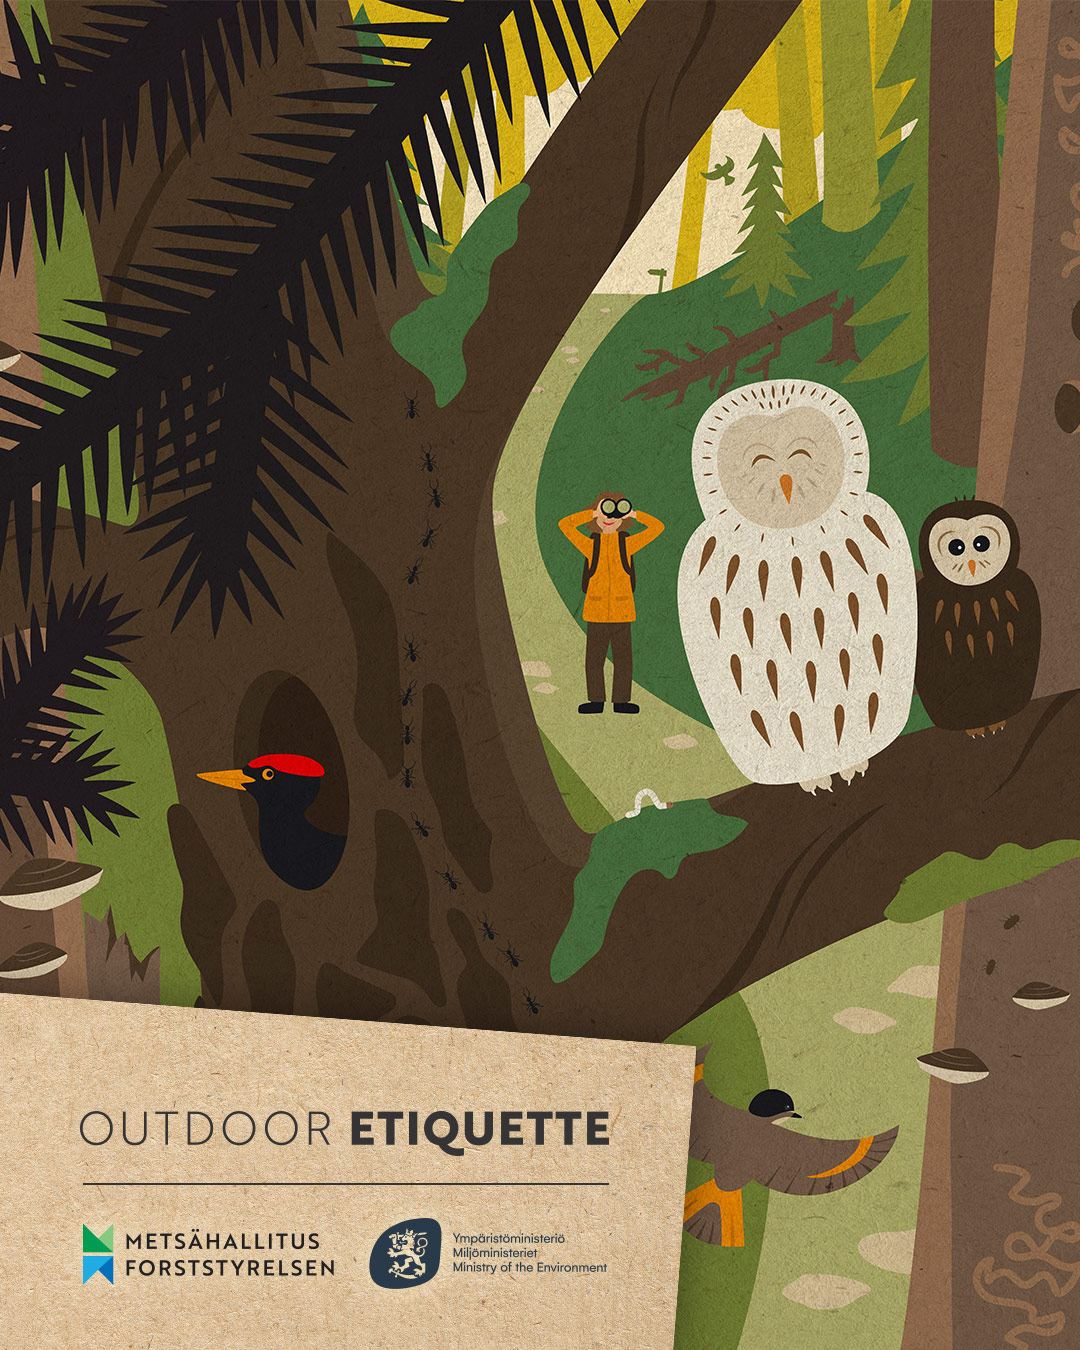 A person looking at an owl through binoculars and the text at the bottom: Outdoor etiquette